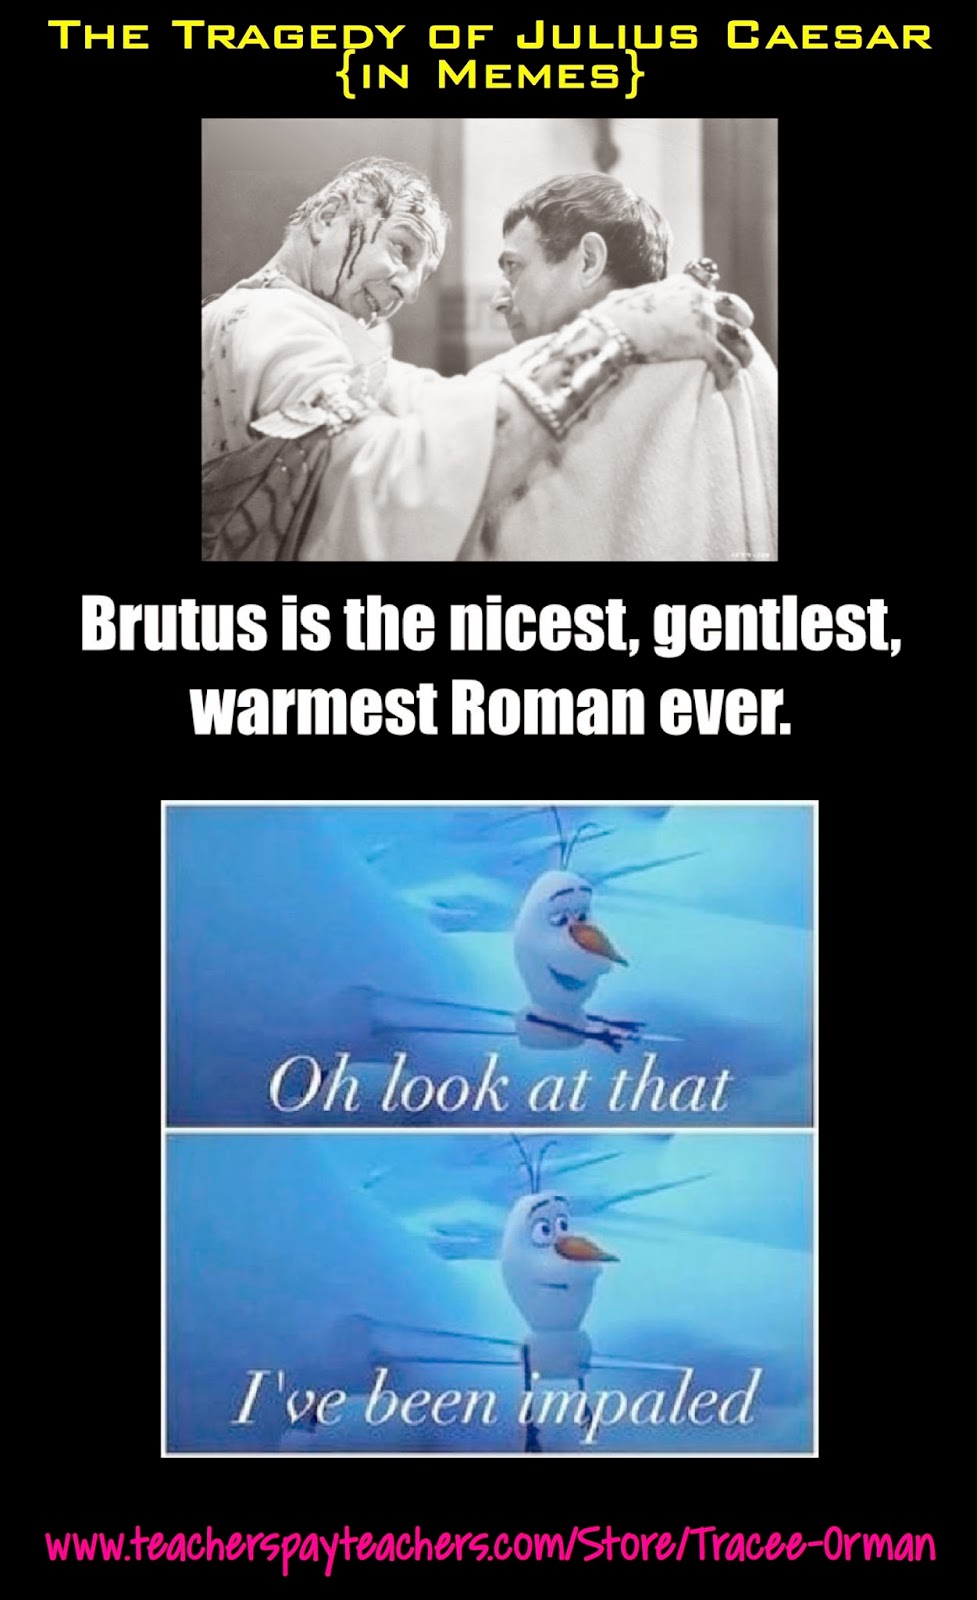 "Oh, look at that. I've been impaled." Julius Caesar in Memes